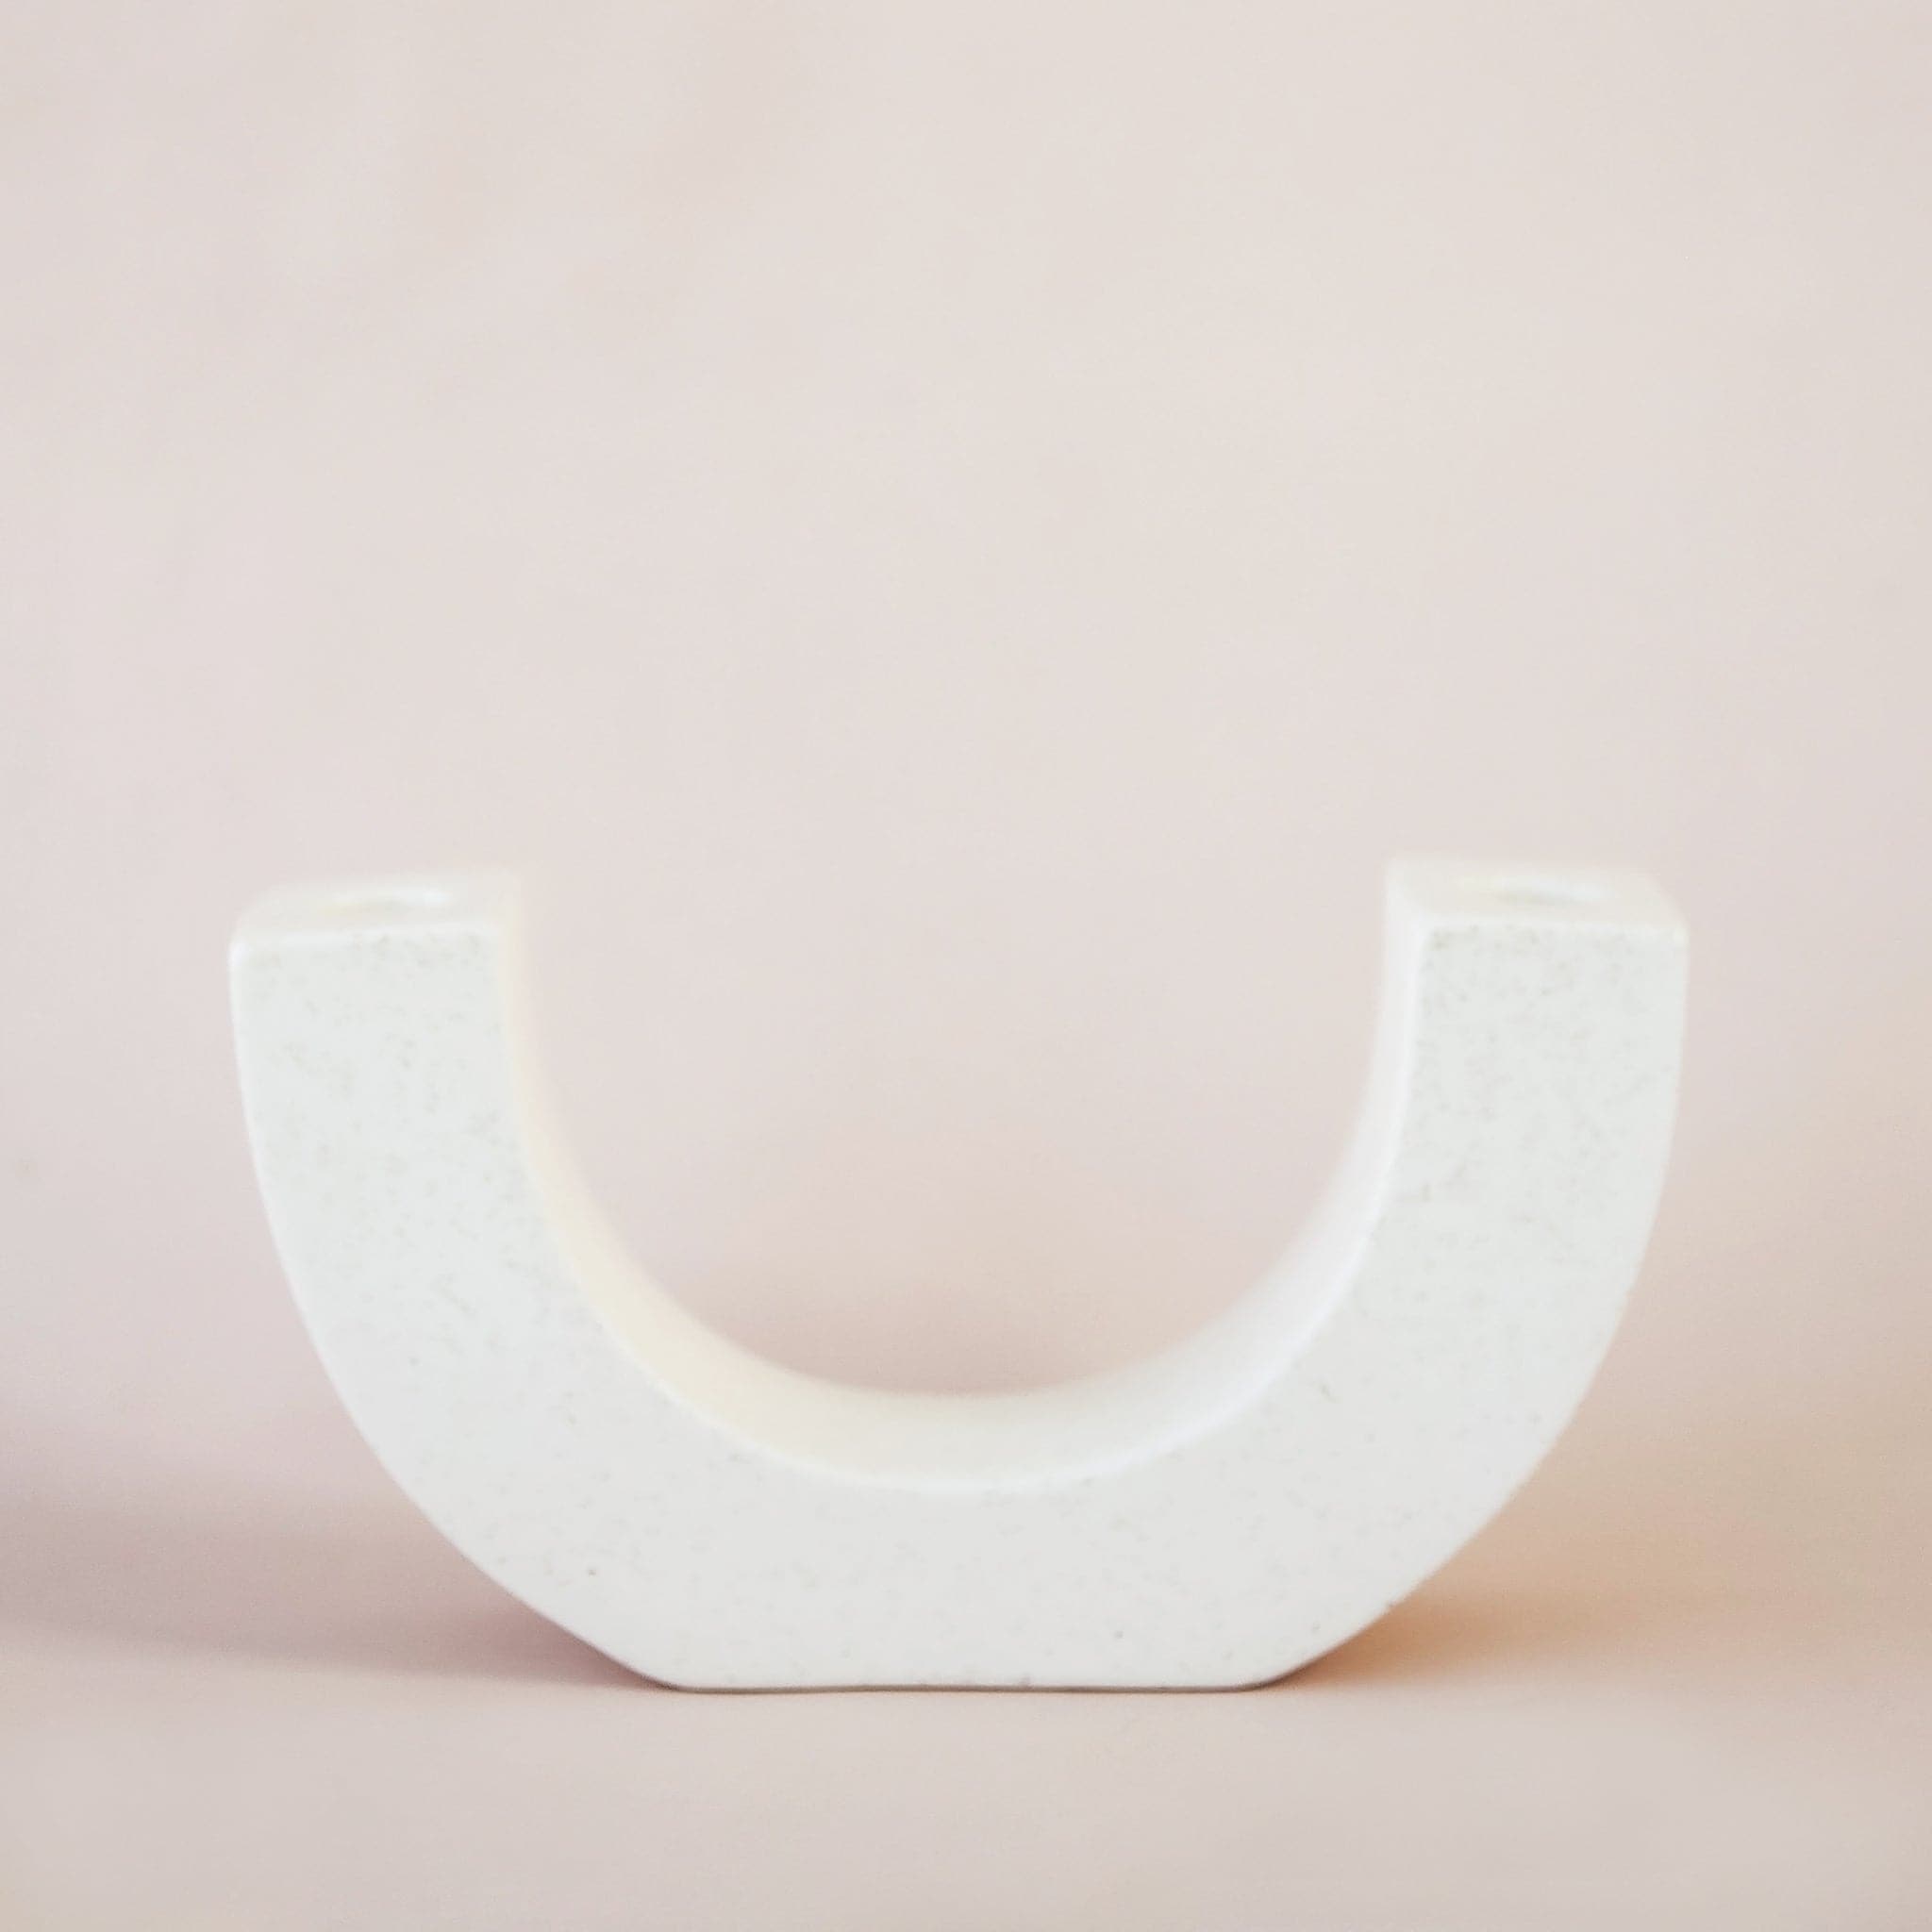 Modern ceramic u-shaped candle holder, designed to hold two candle sticks on each end. This white candle stand with faint speckles lays against a soft toned background. 